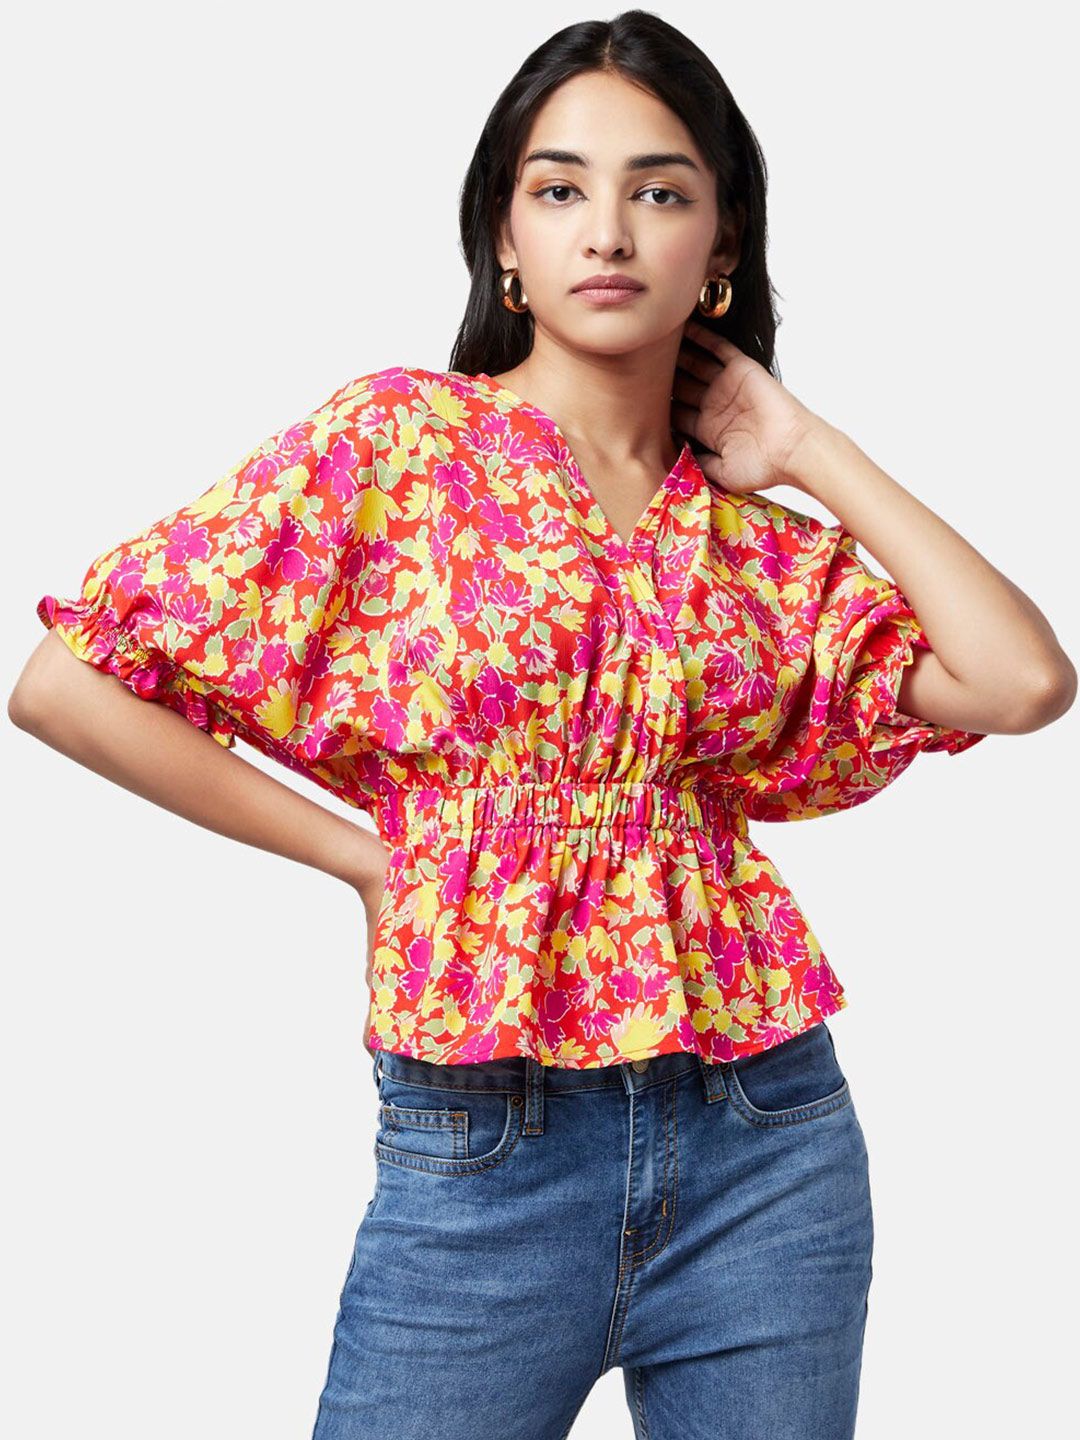 YU by Pantaloons Floral Print Cinched Waist Top Price in India